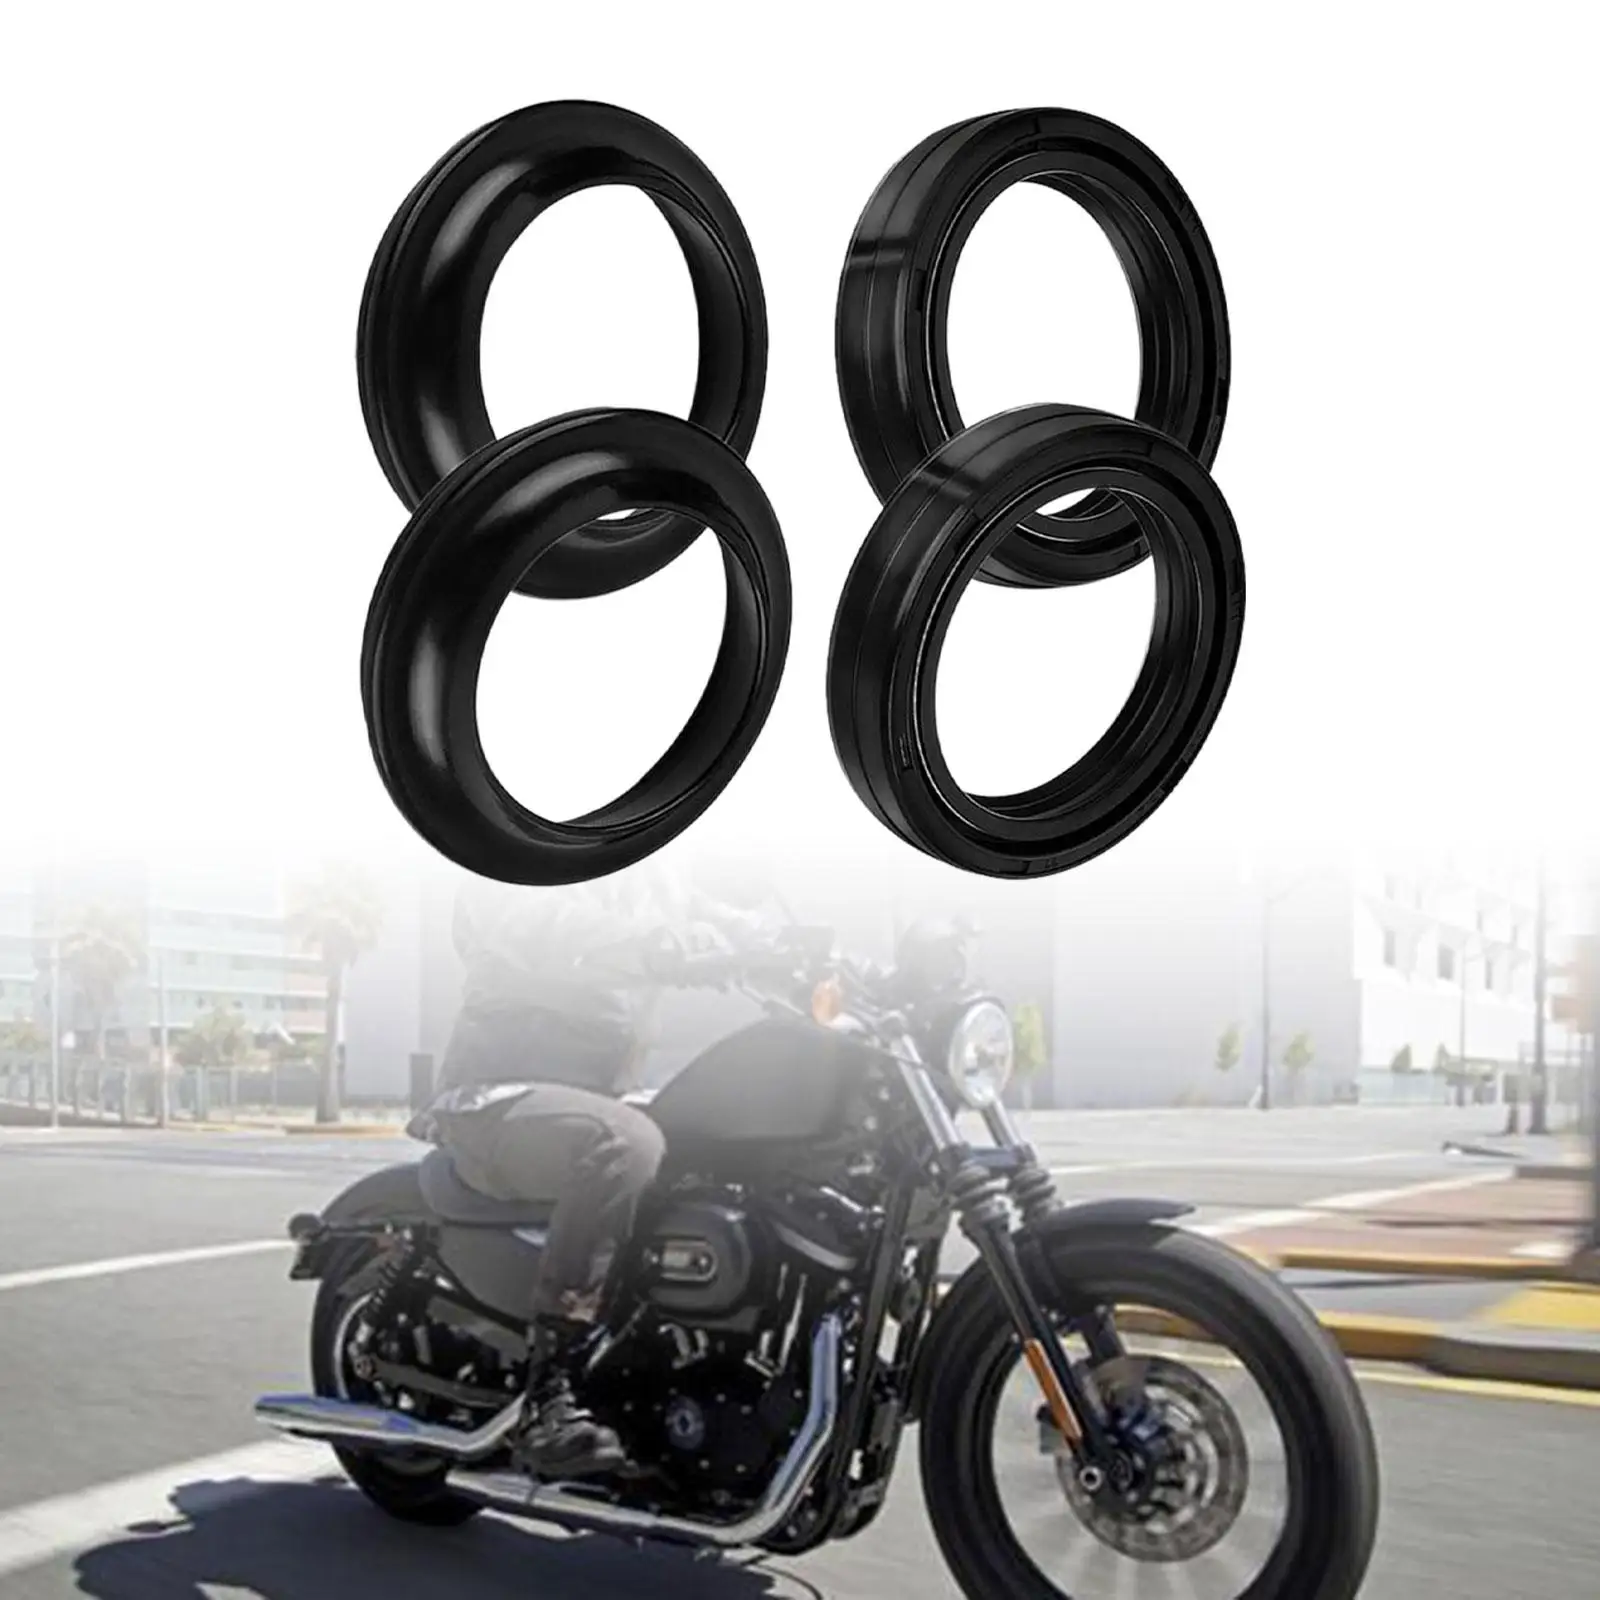 4x Front Fork Oil Seal and Dust Seal Heat Resistance Durable 39x52x11mm for Harley XL883N XL1200L XL1200R Xlh883L Xlh1100